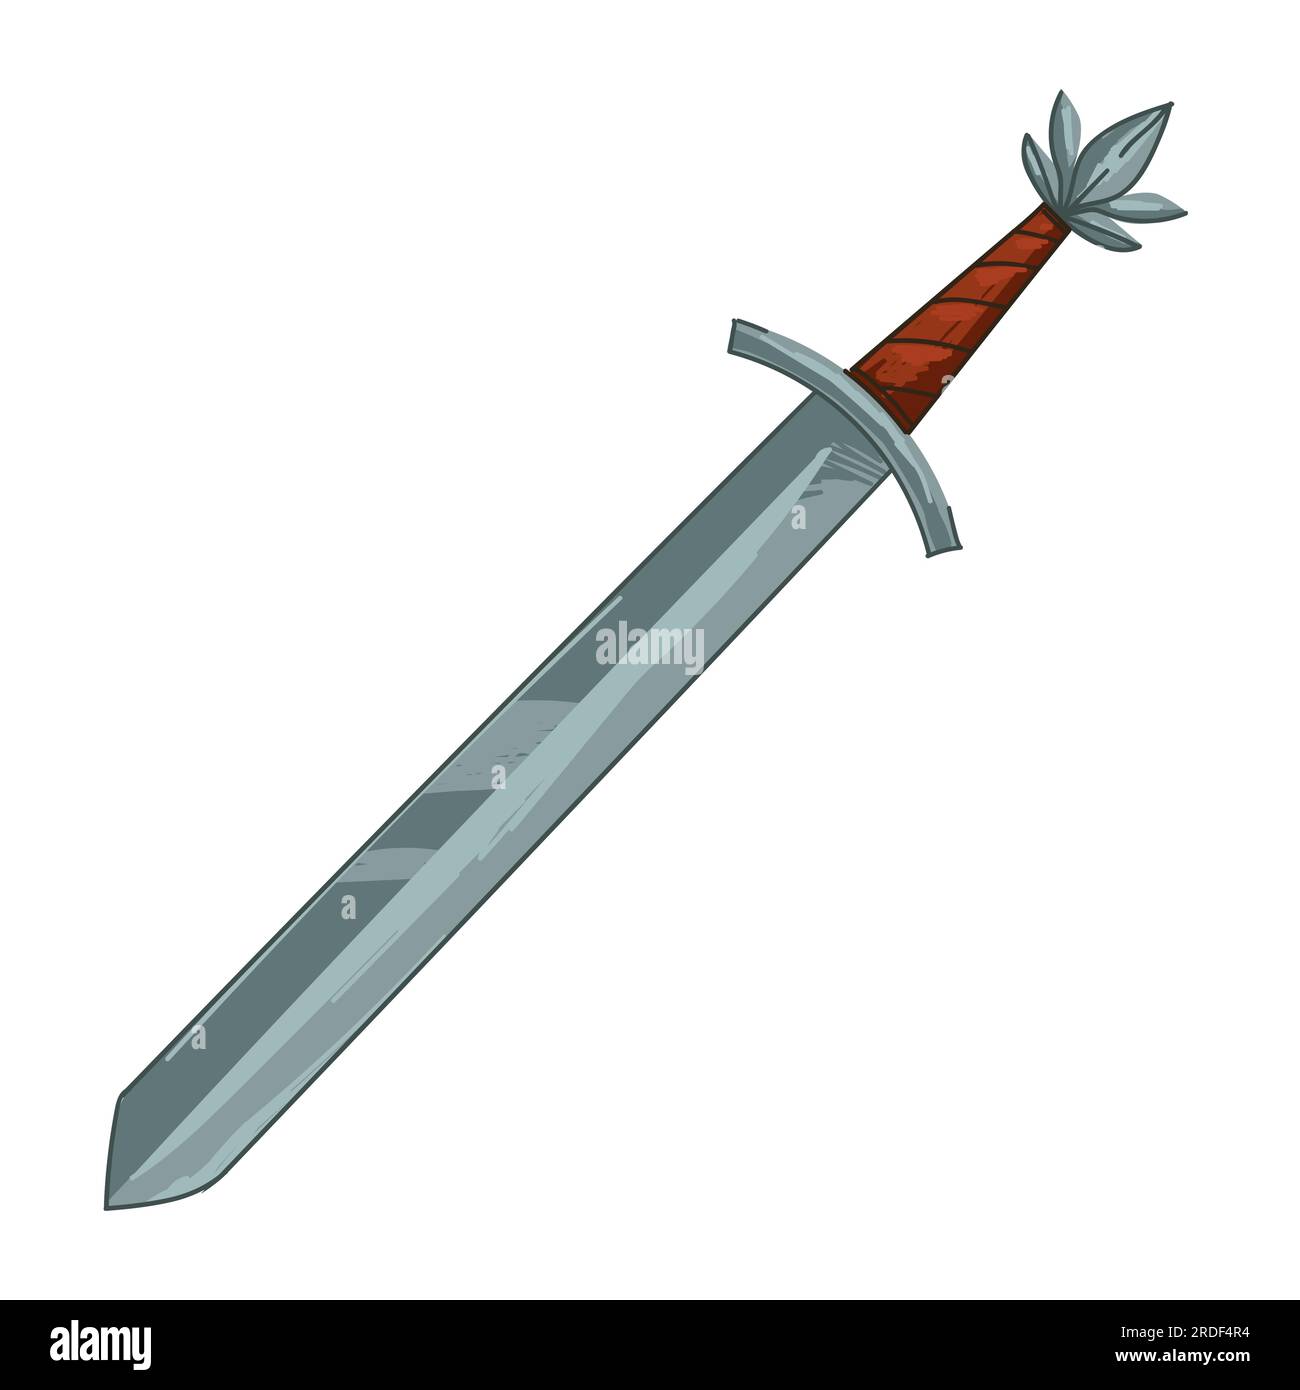 Sword of ancient times and epoch, antique exponent Stock Vector